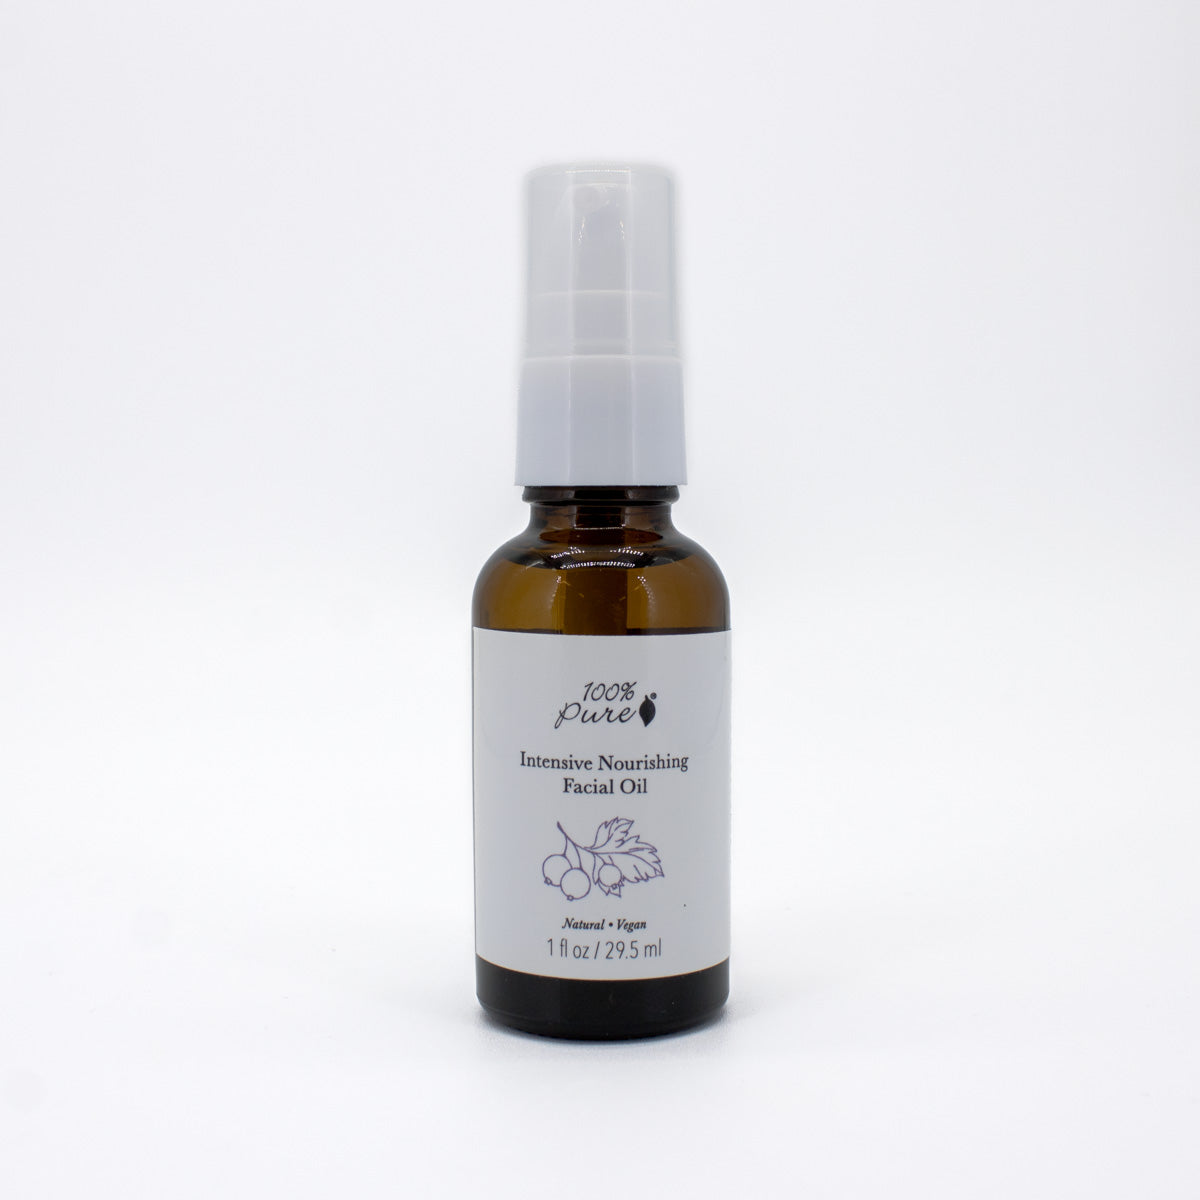 100% pure Intensive Nourishing Facial Oil 1oz - Small Amount Missing